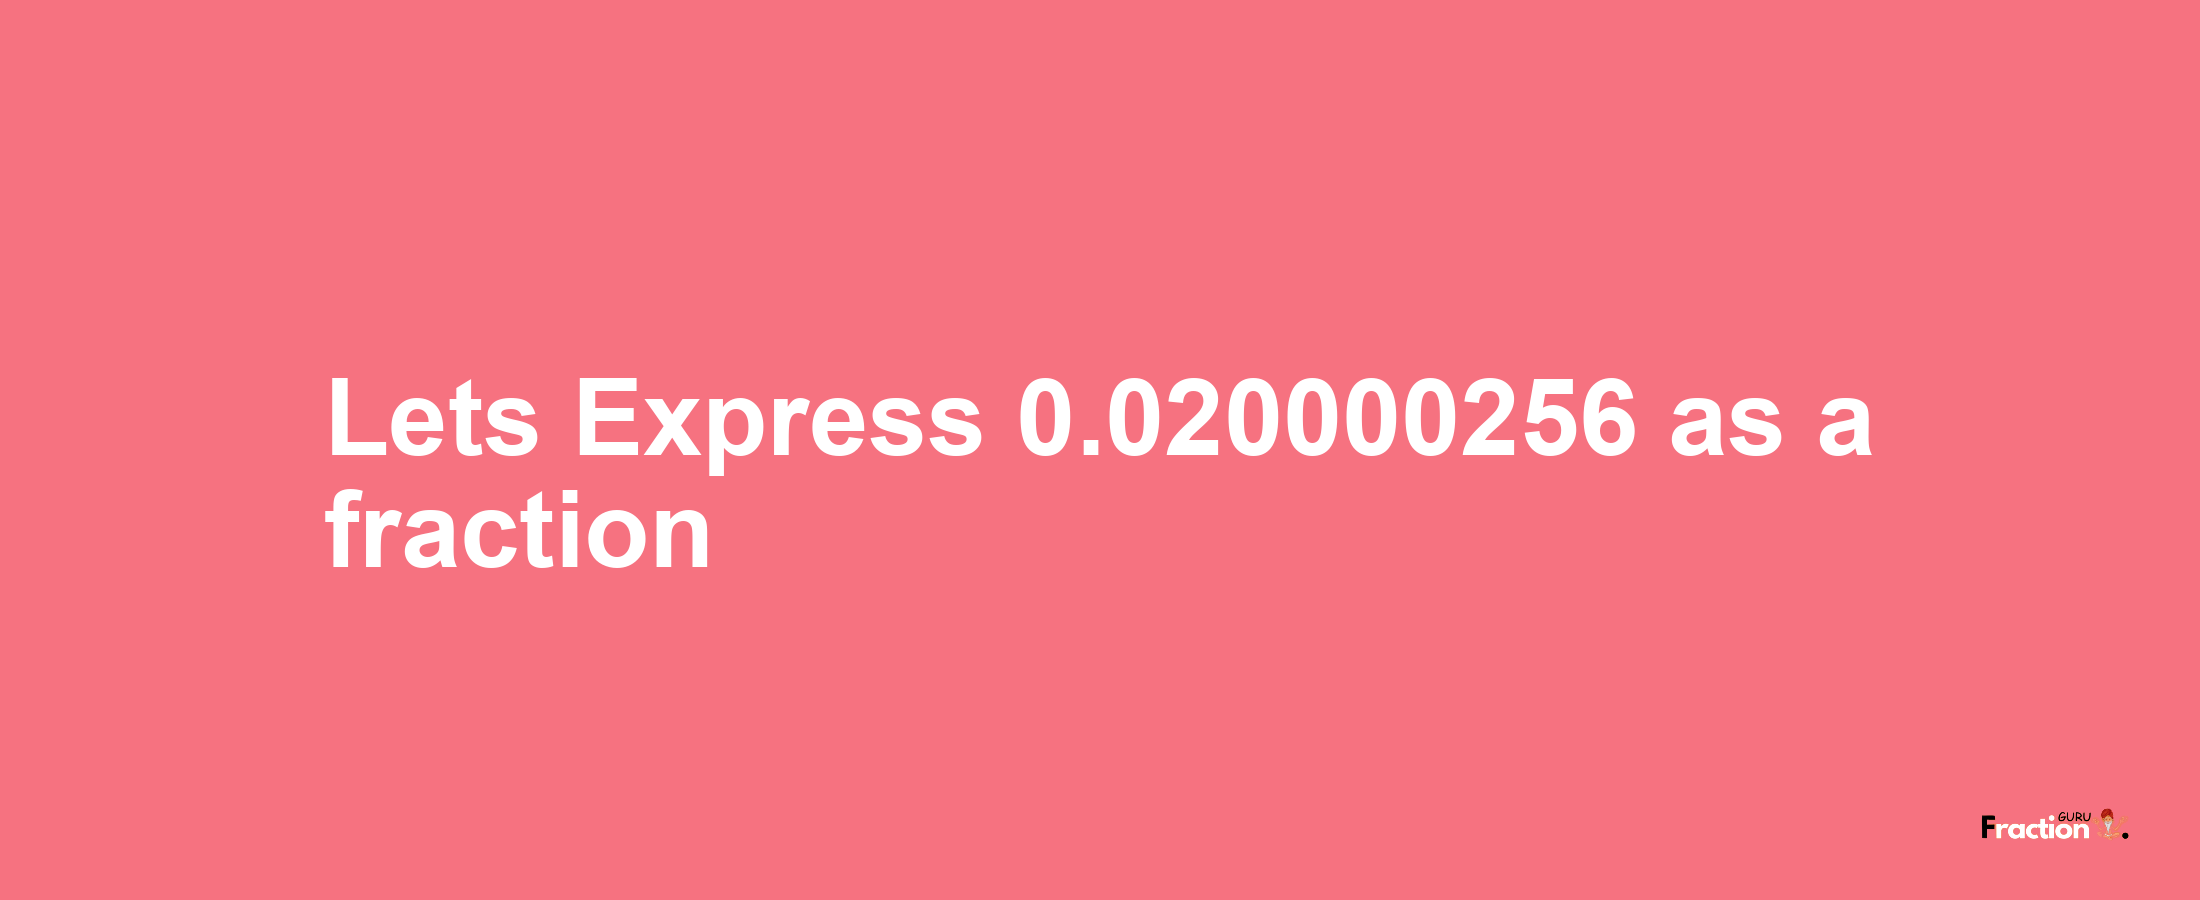 Lets Express 0.020000256 as afraction